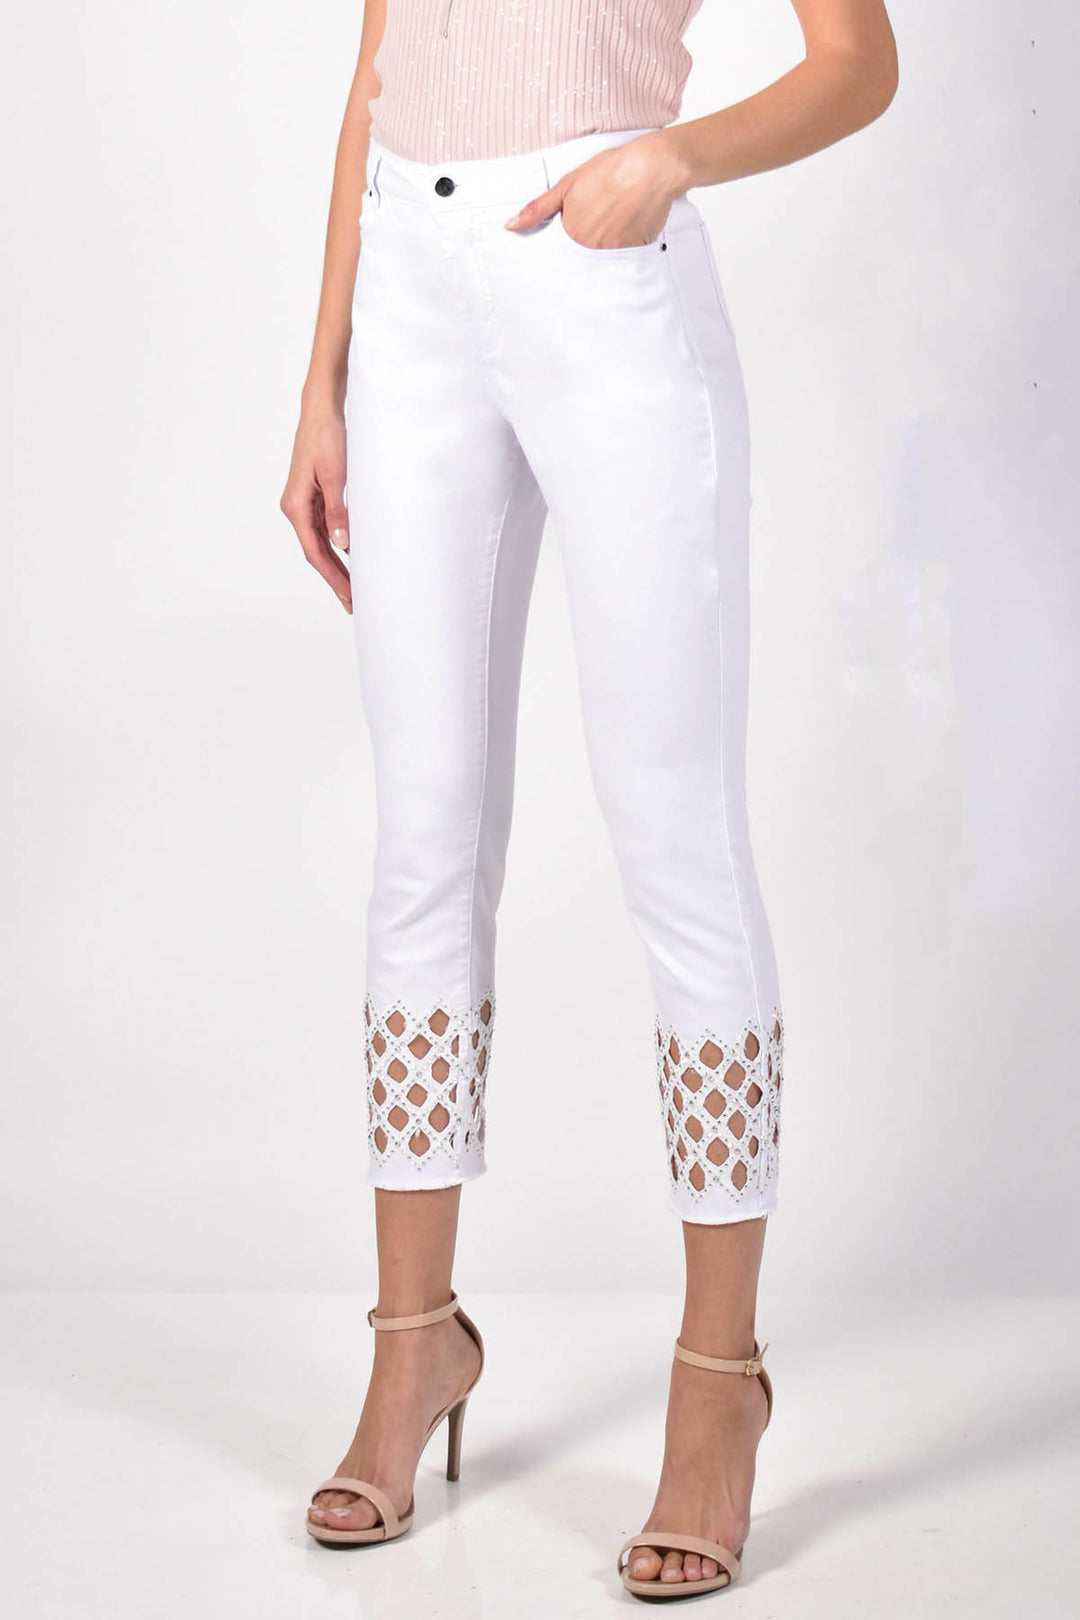 Pair of ankle detail denim jeans in white by Frank Lyman sold and shipped from Pizazz Boutique Nelson Bay women's dresses online Australia